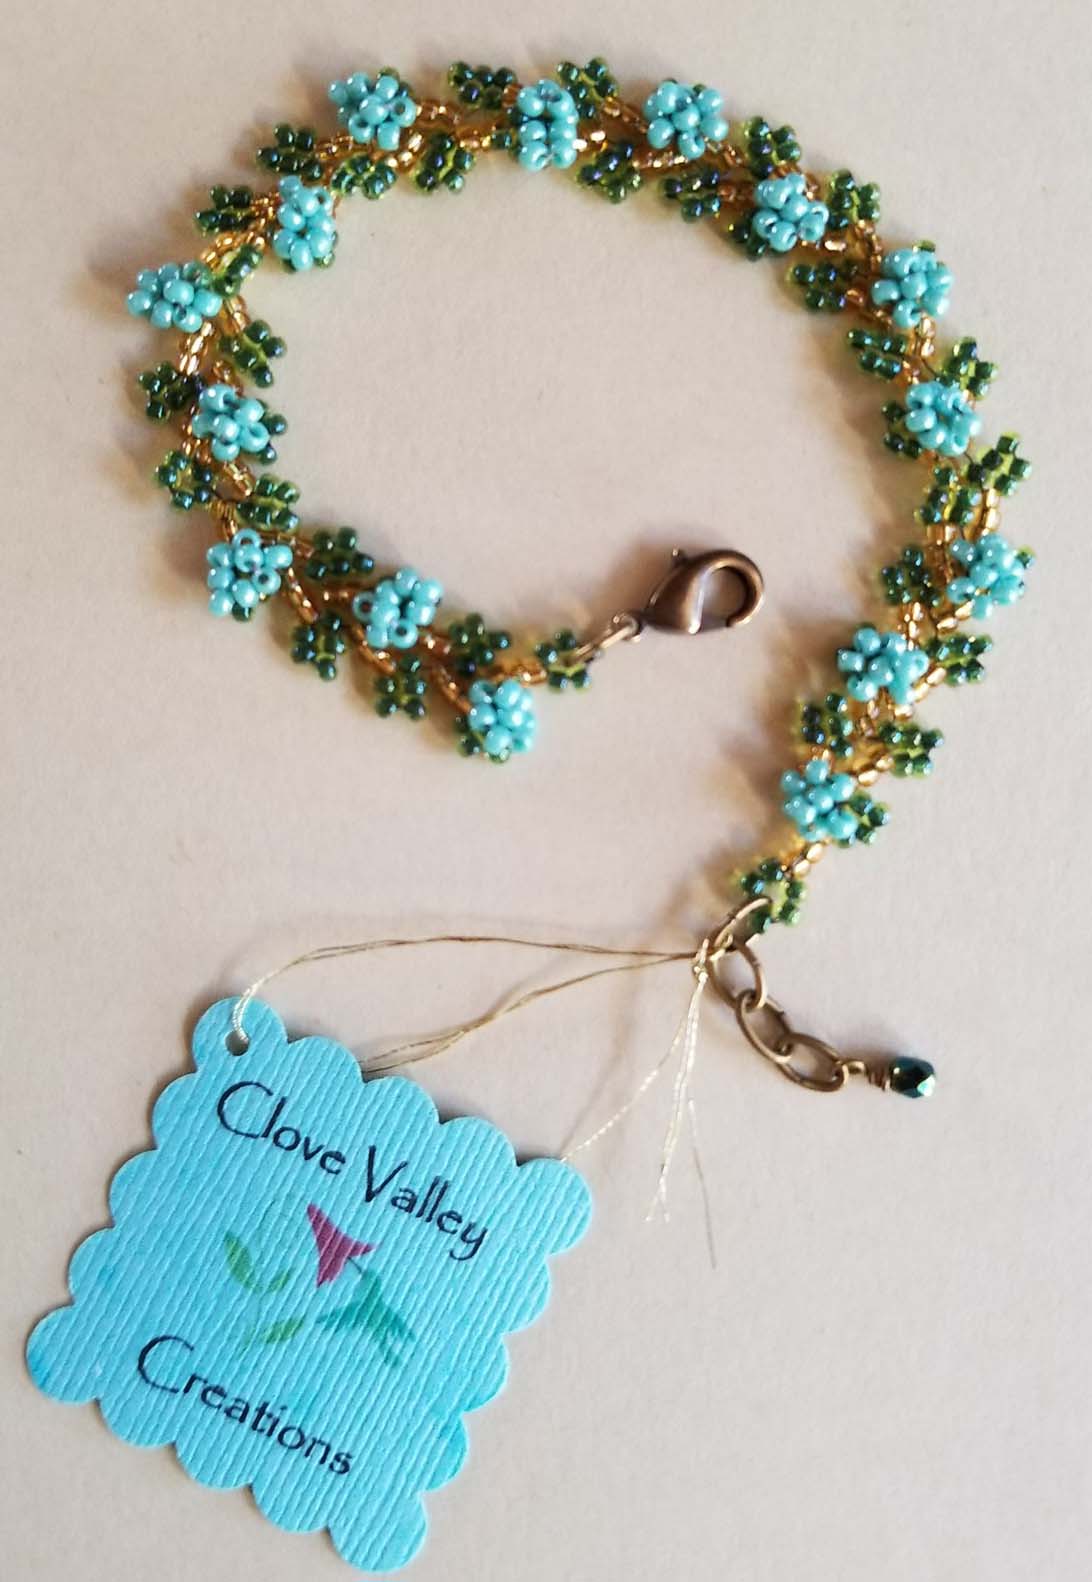 Clove Valley Creations